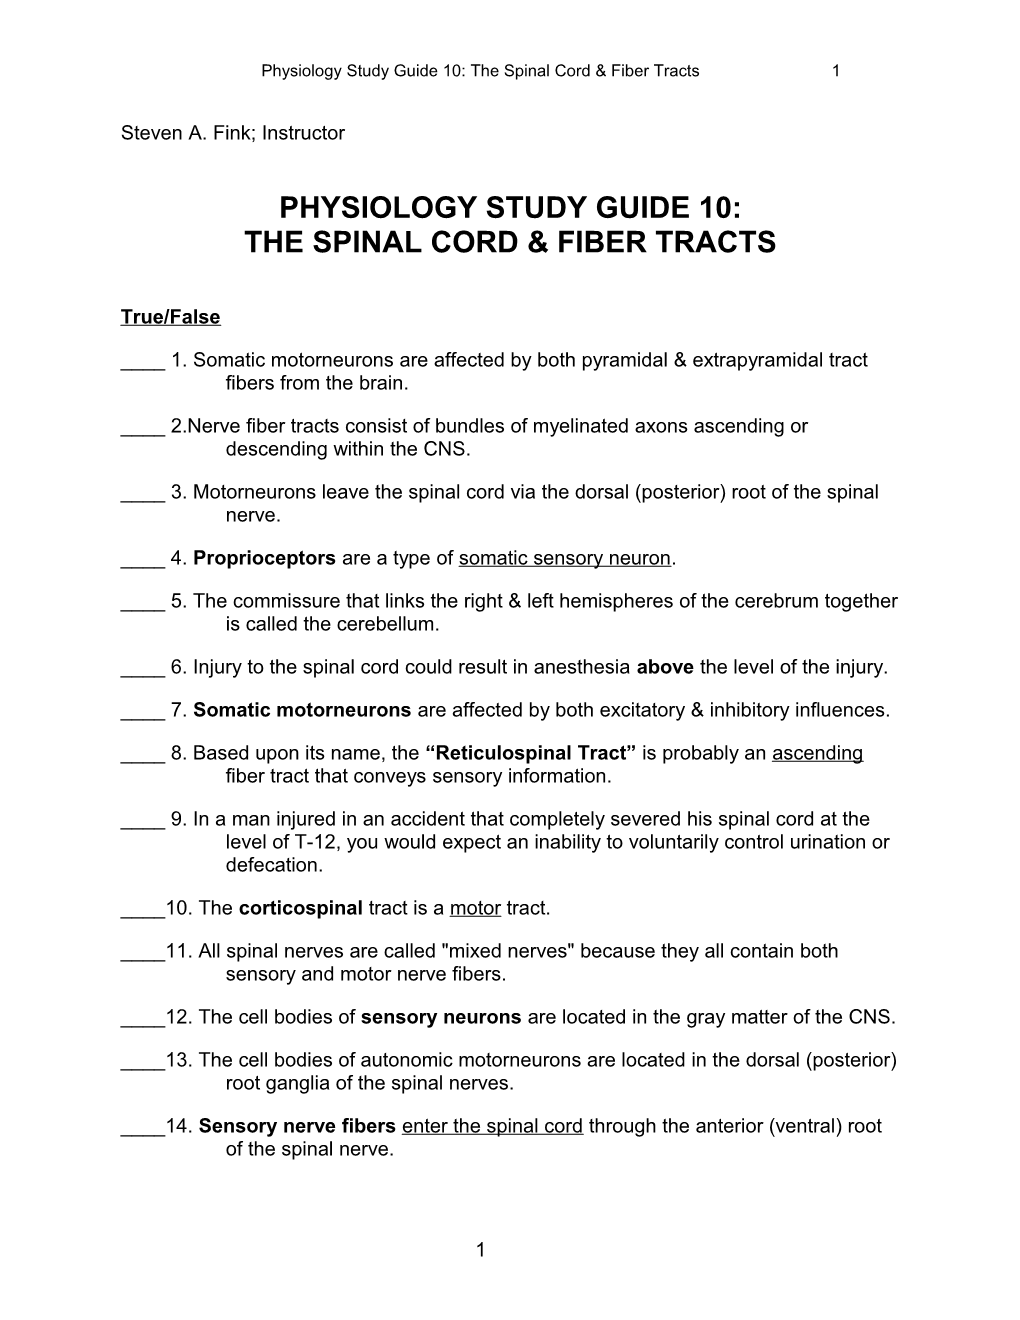 Physiology Study Guide 10: the Spinal Cord & Fiber Tracts1